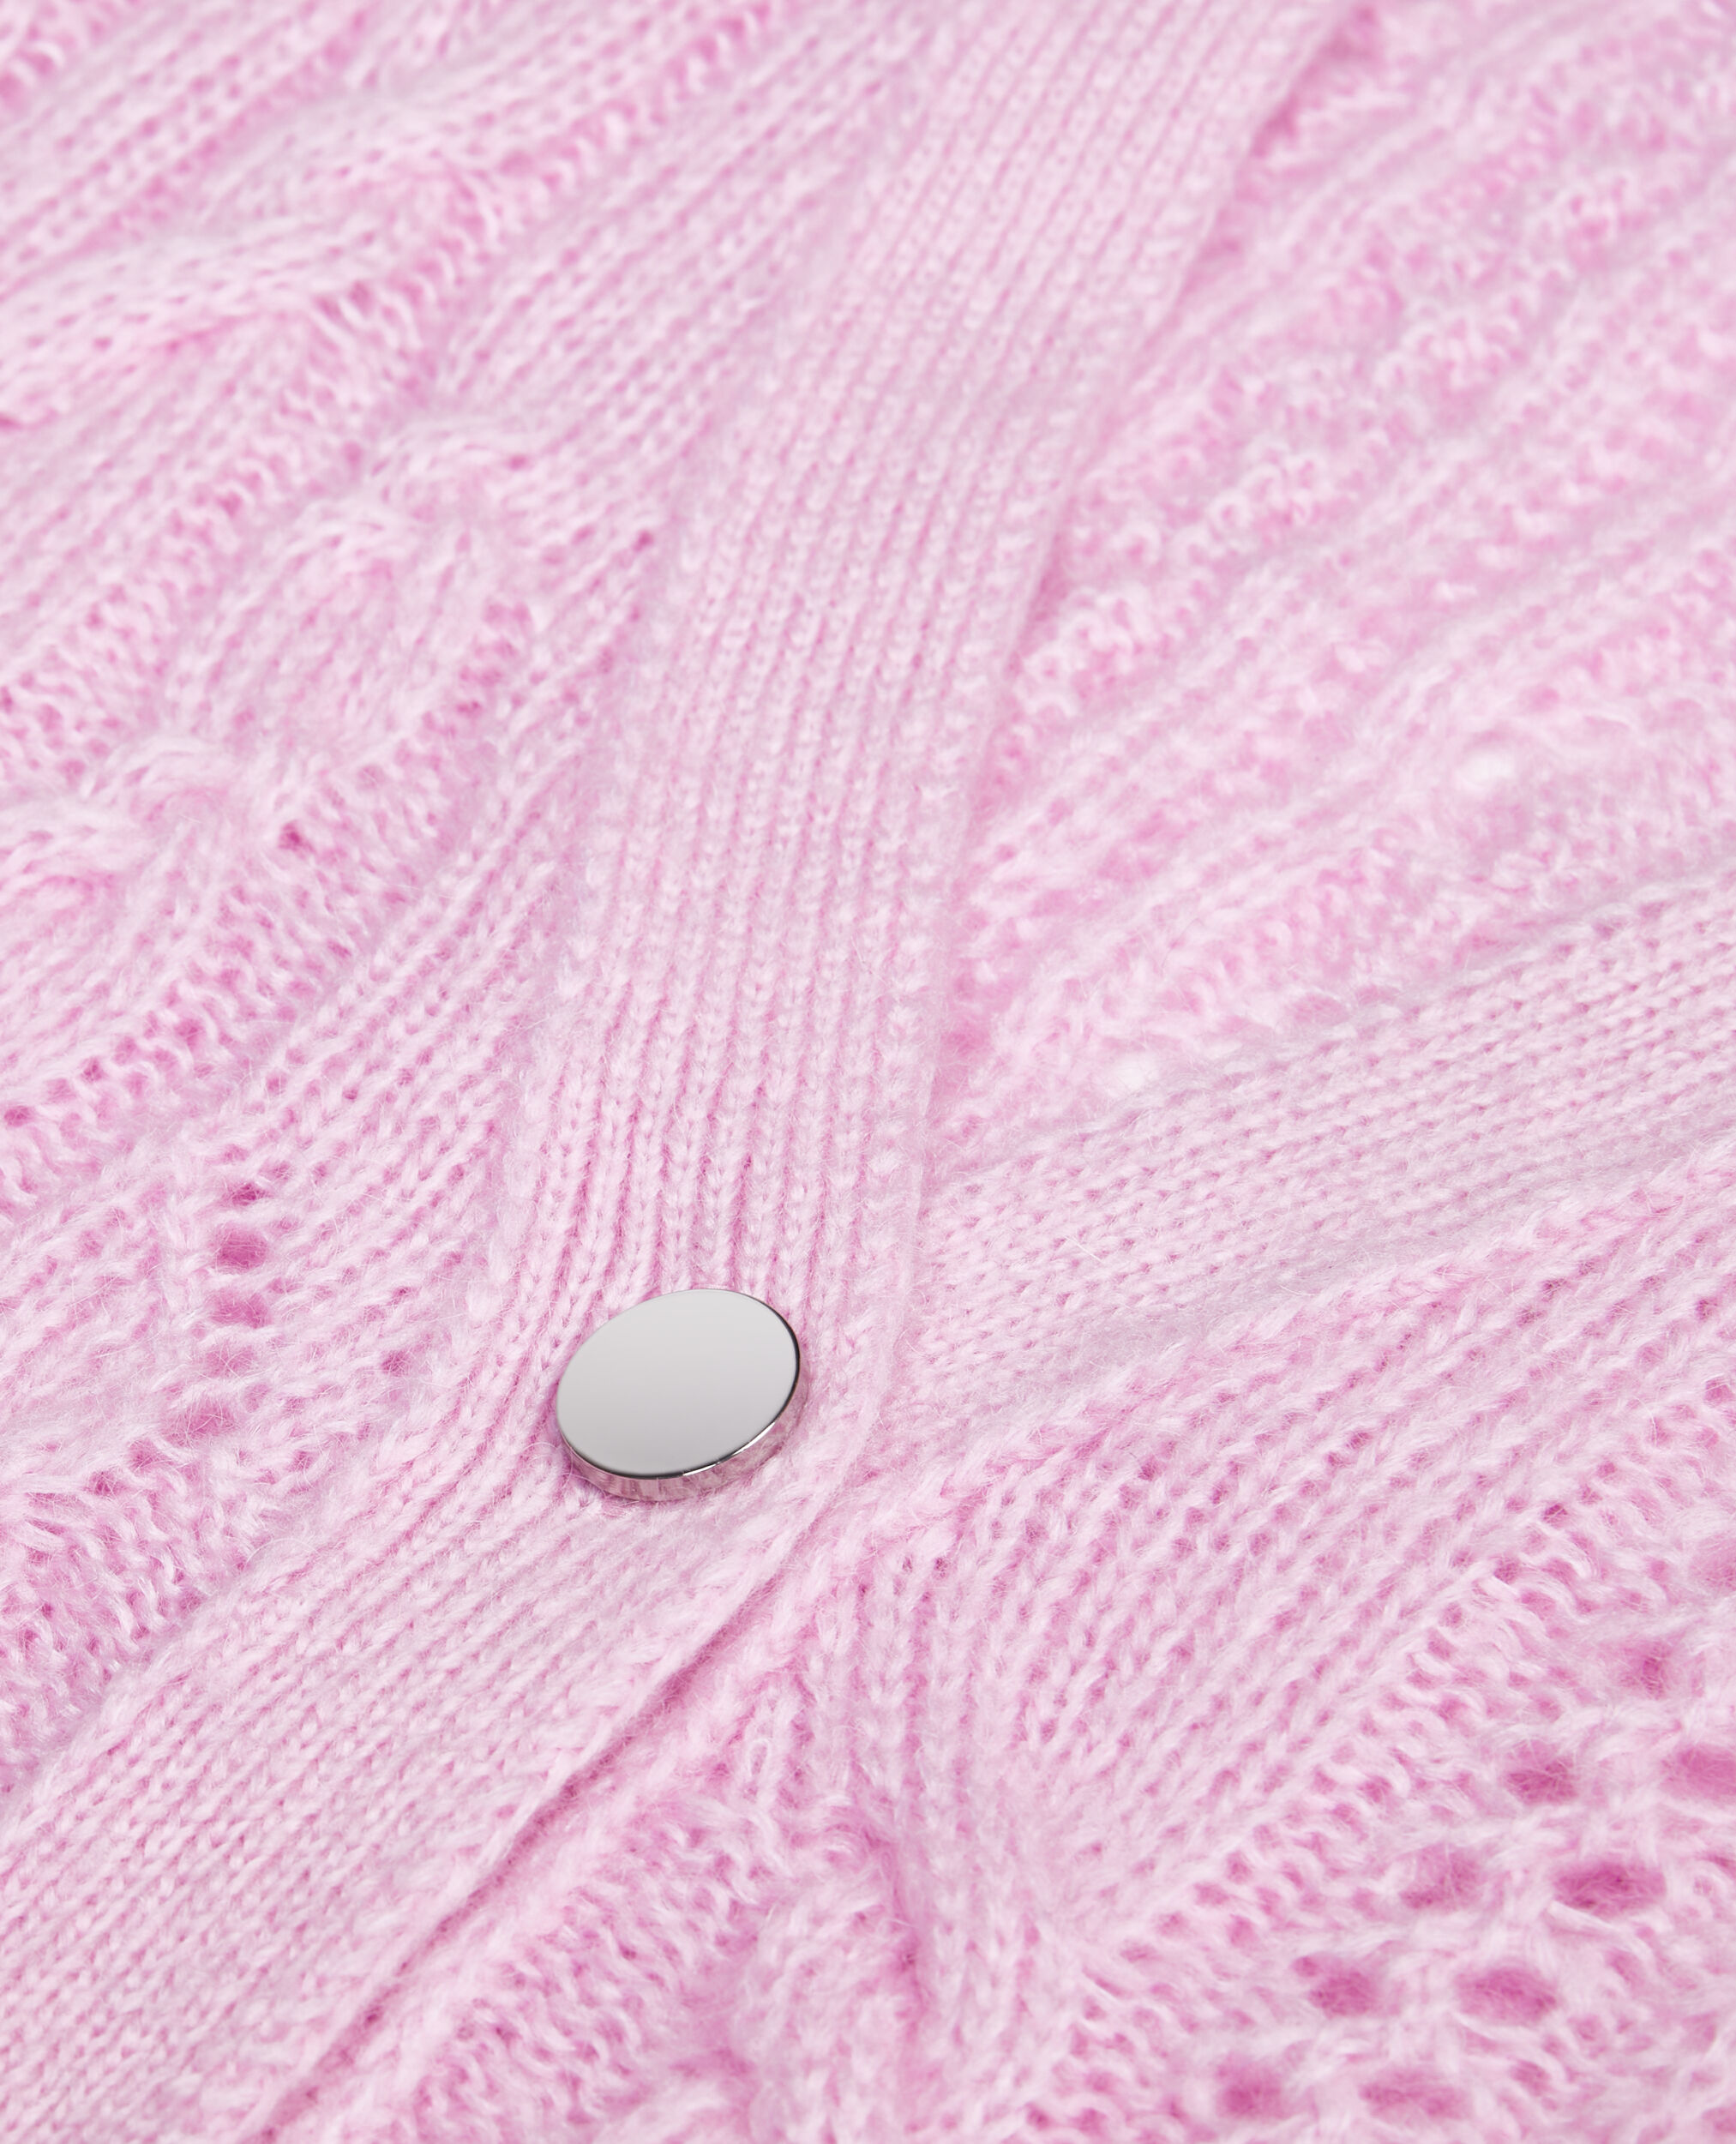 Rosa Cardigan aus Wolle mit Zopfmuster, PINK, hi-res image number null